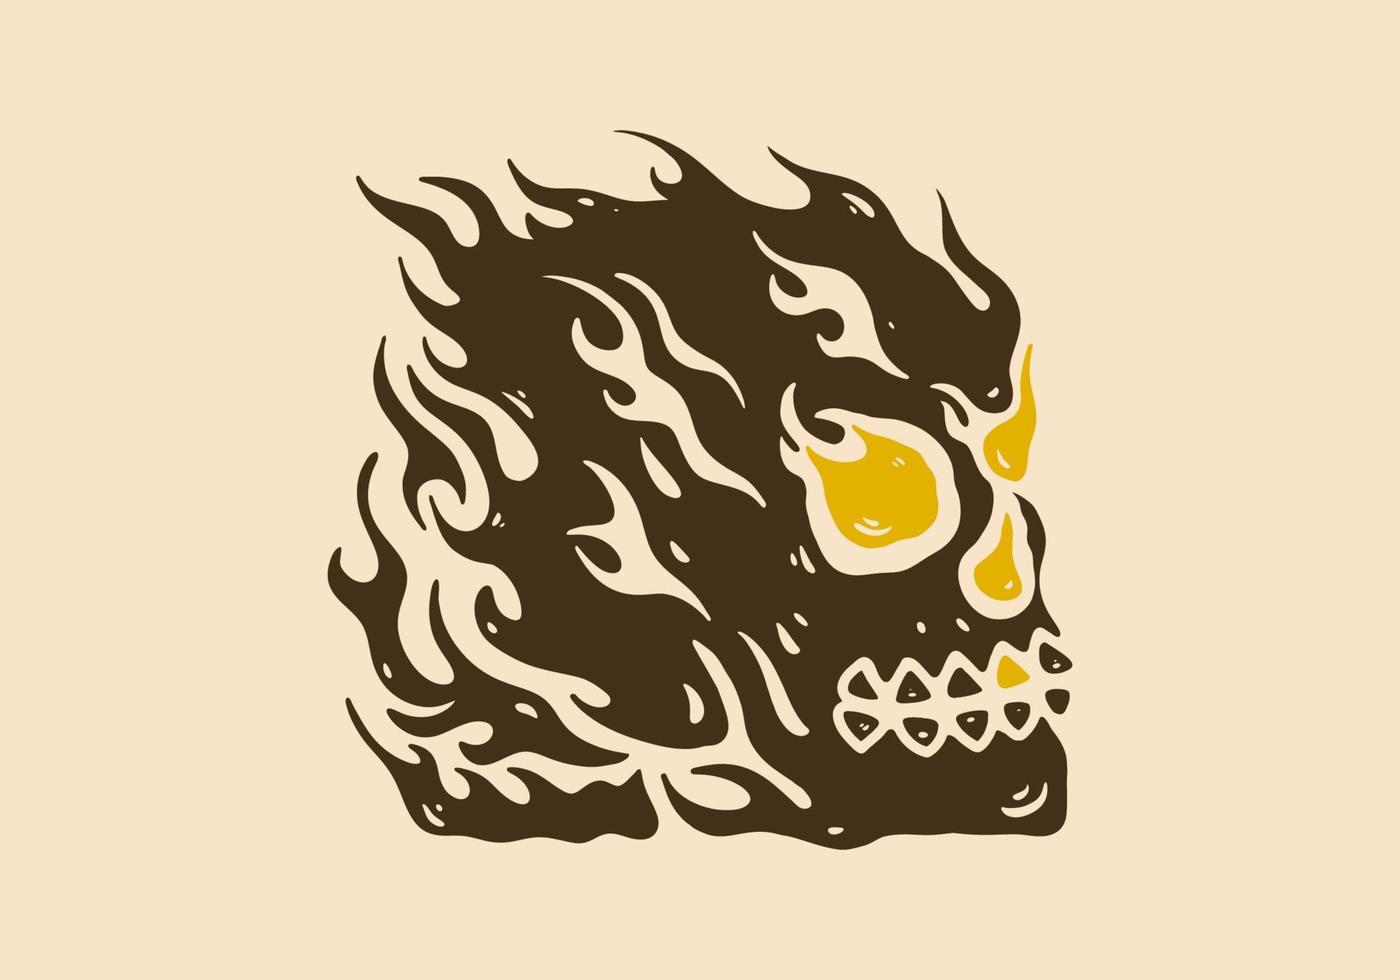 Illustration design of skull with flaming fire vector